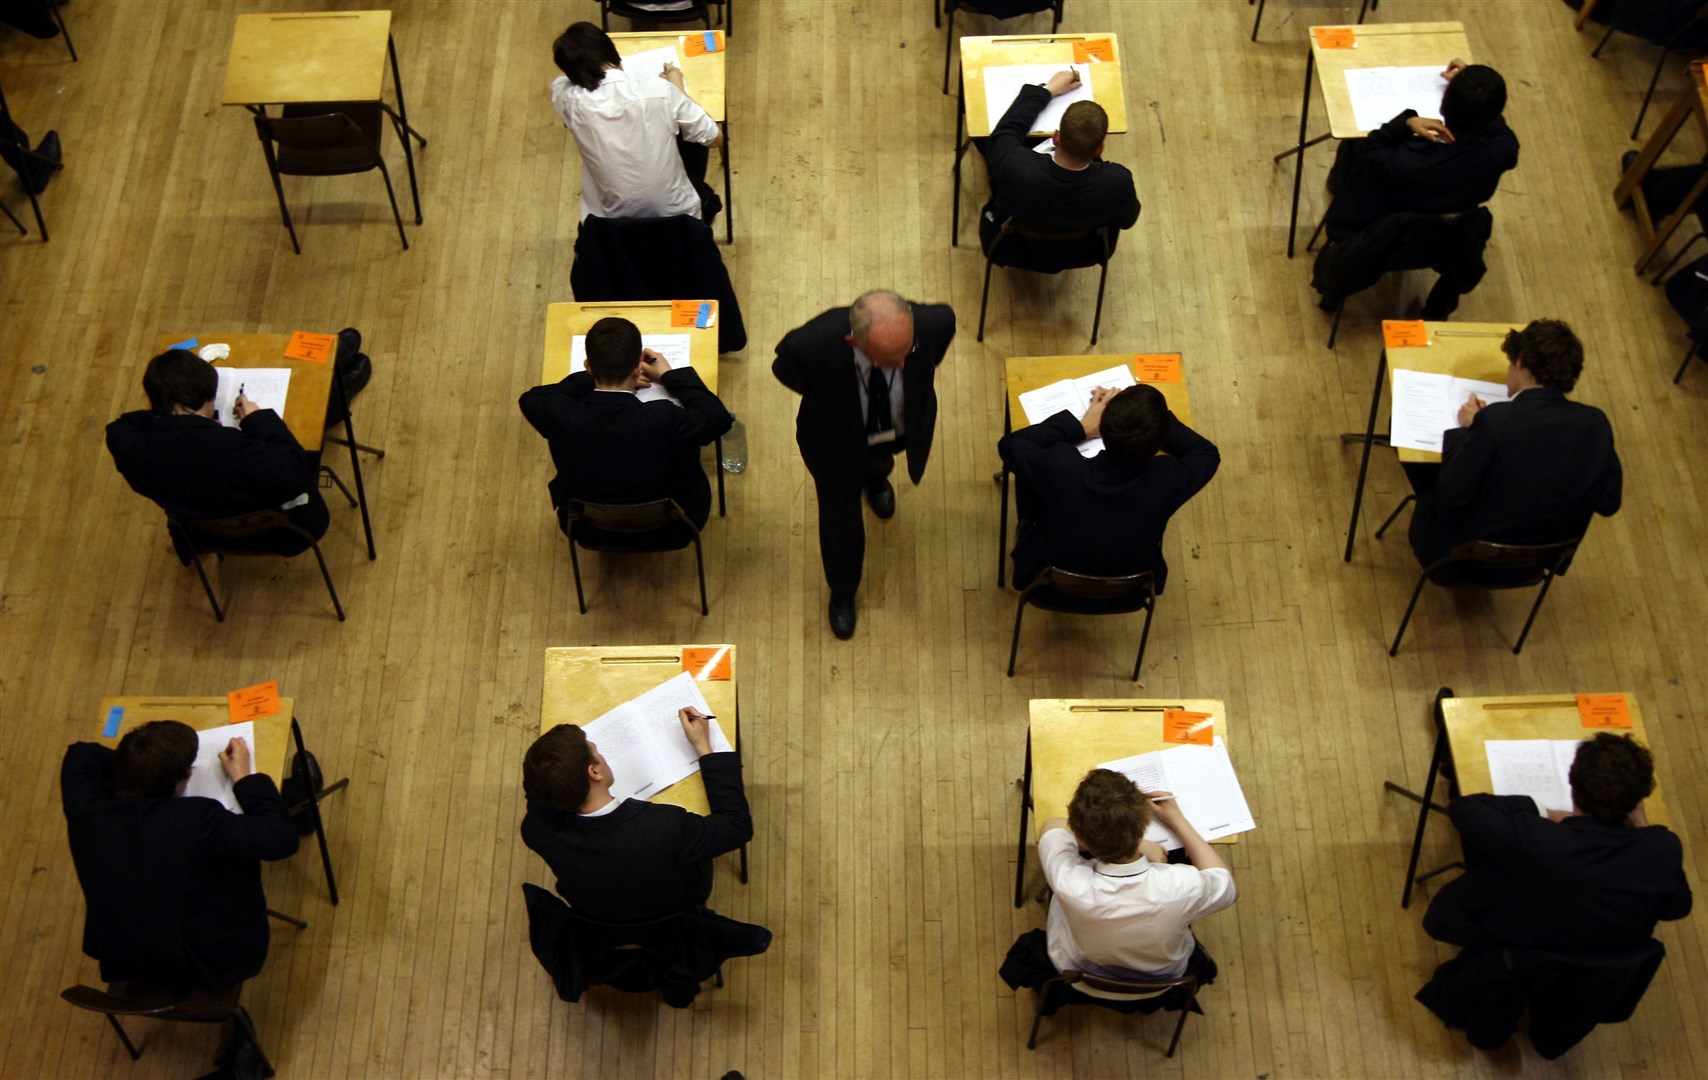 General Secretary of the National Association of Head Teachers (NAHT) has disagreed that summer exams in 2021 should be pushed back because of the pandemic, as recommended in a report by the Children’s Commissioner’s Office’s published on Tuesday (David Jones/PA)